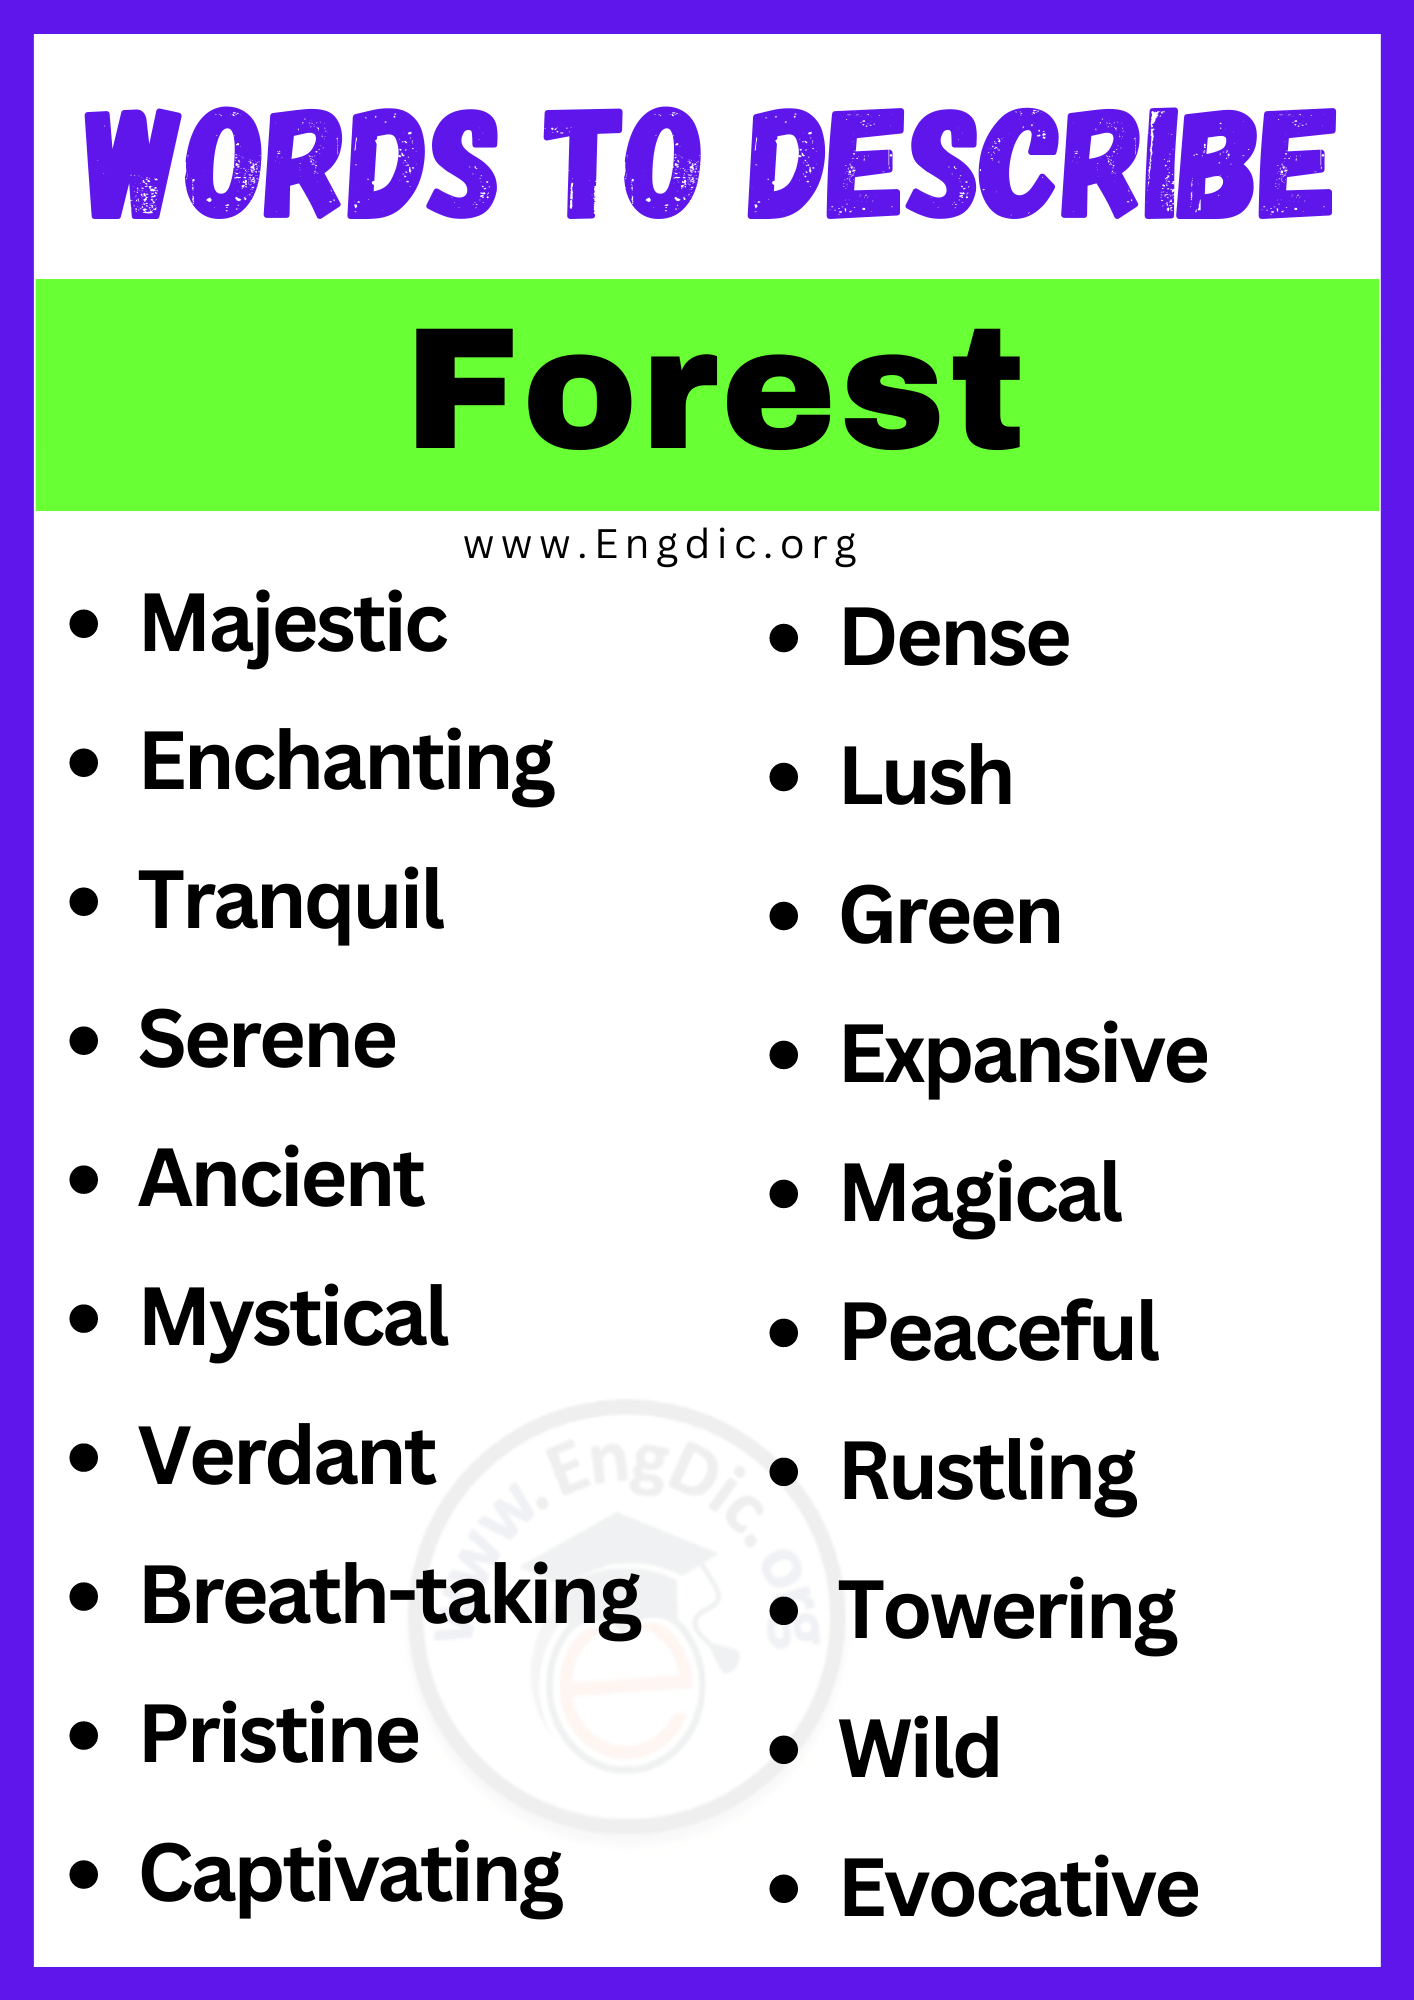 Words to Describe a Forest